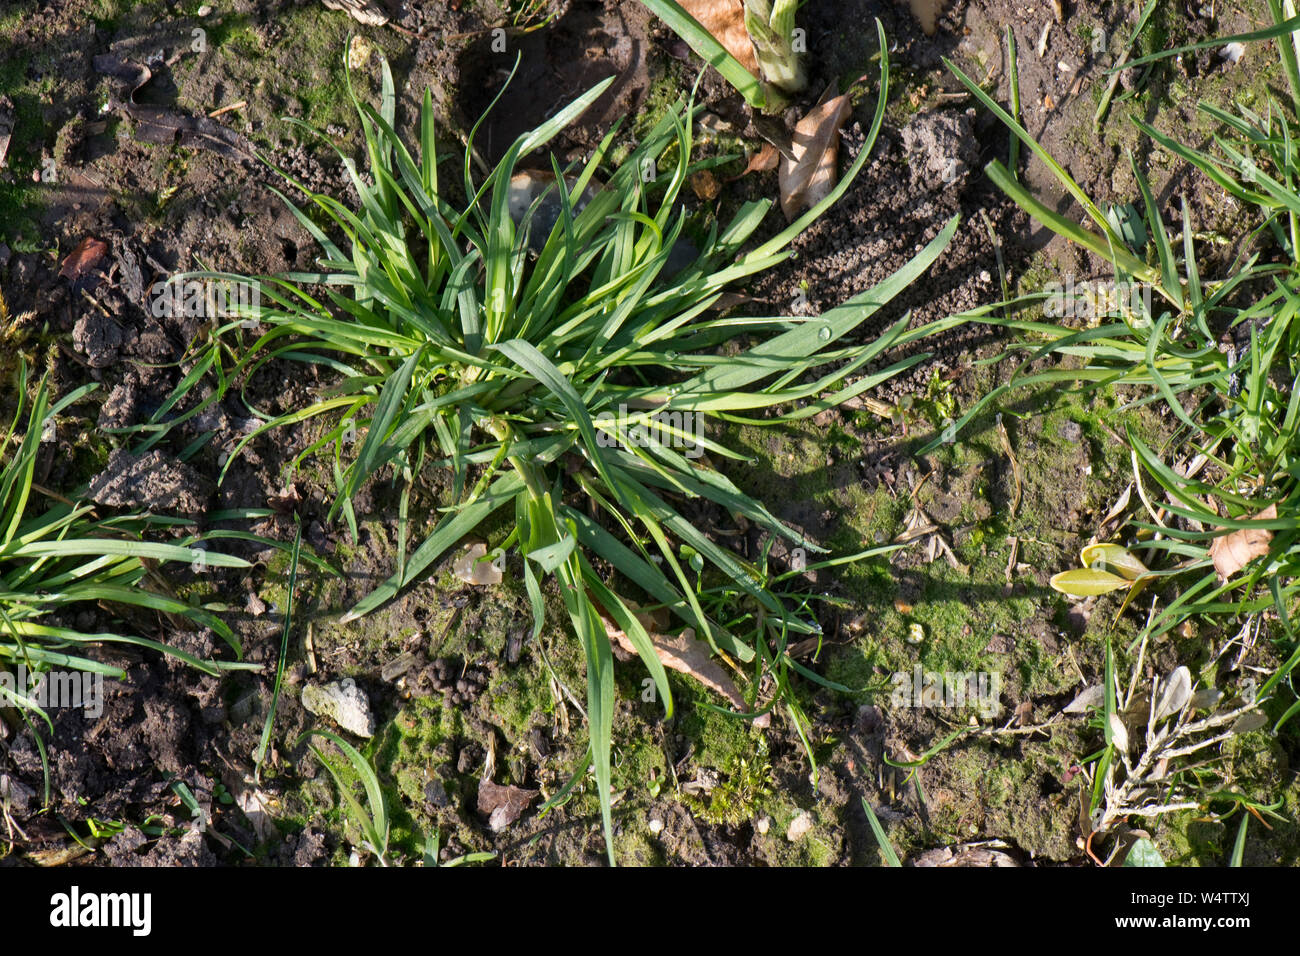 Annual meadow-grass (Poa annua) prostrate plant with tillers in a garden flower bed, Berkshire, April Stock Photo